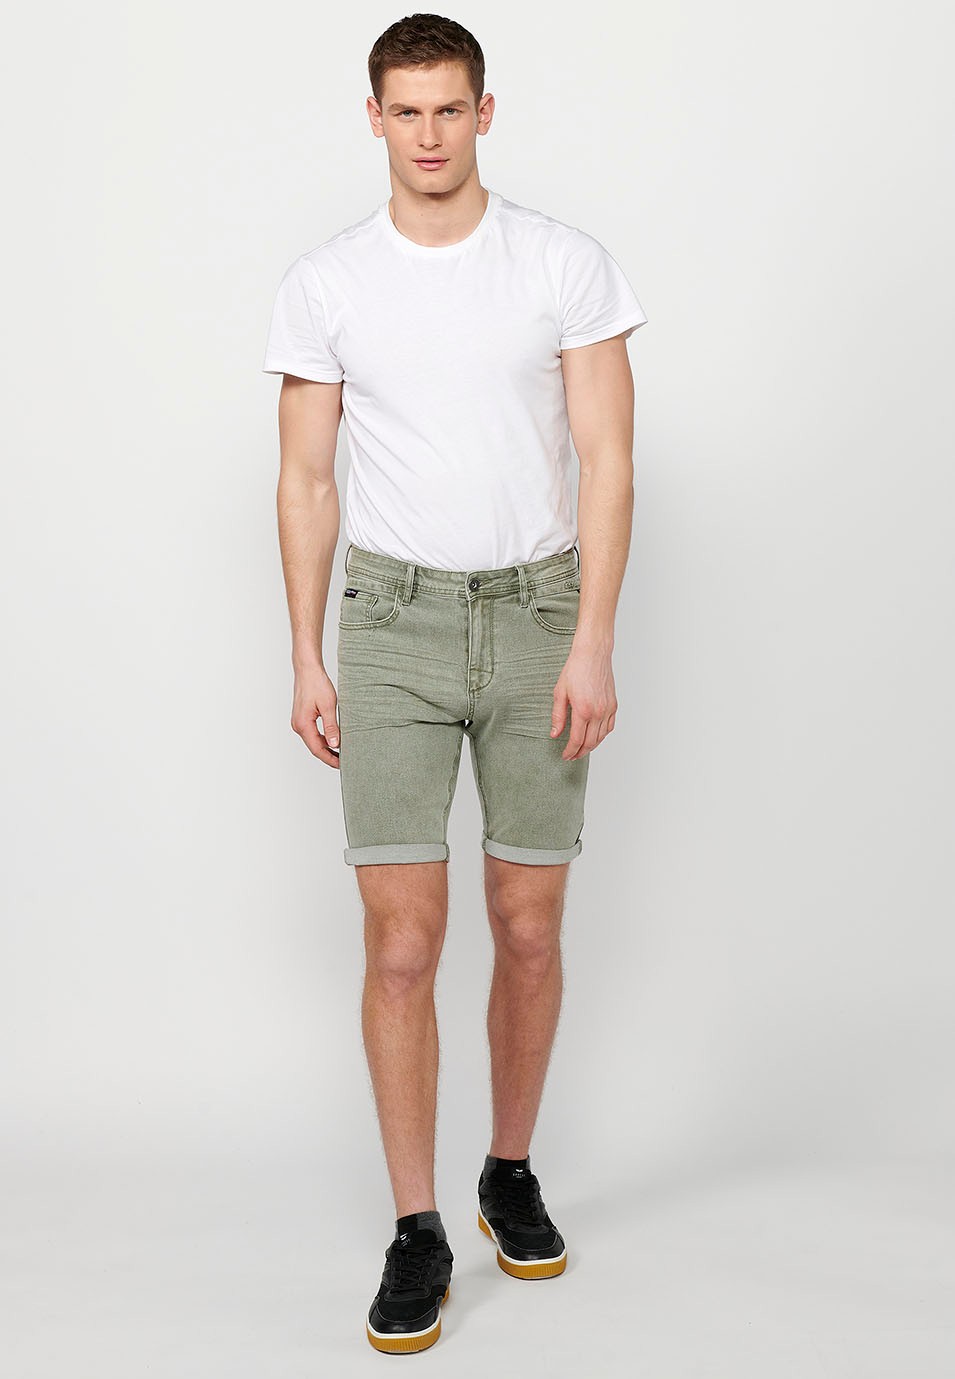 Shorts with a turn-up finish with front zipper and button closure and five pockets, one with a match pocket, in Green for Men